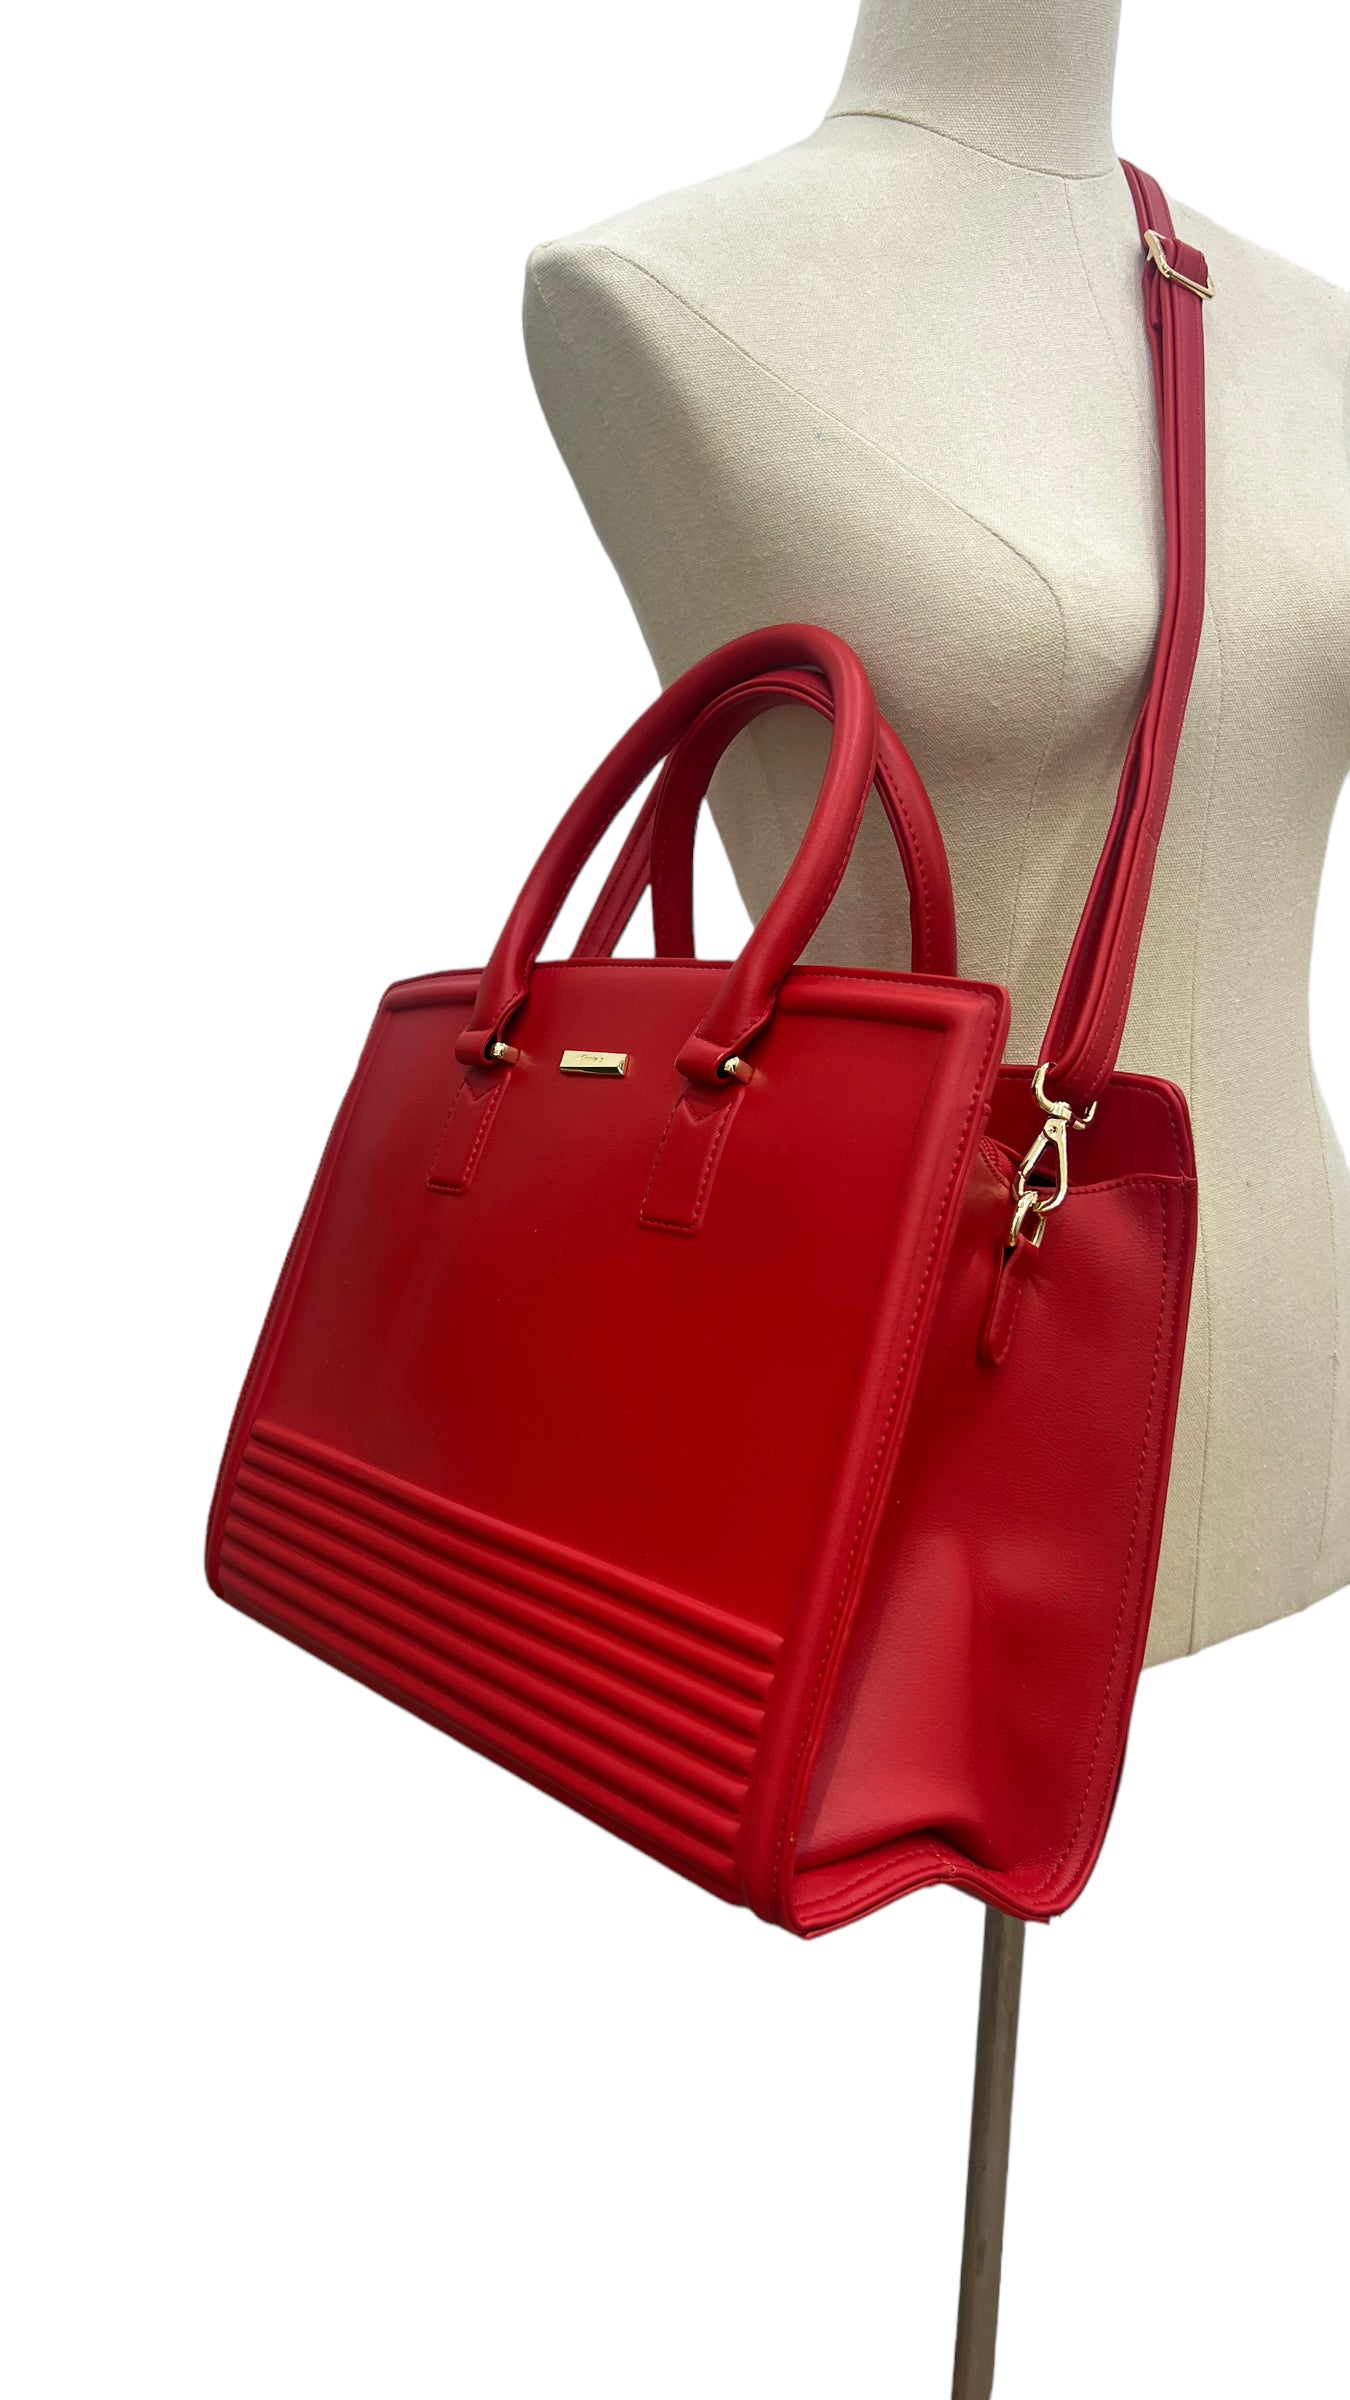 CHRISBELLA RED LARGE DOUBLE HANDLE STRUCTURED BAG